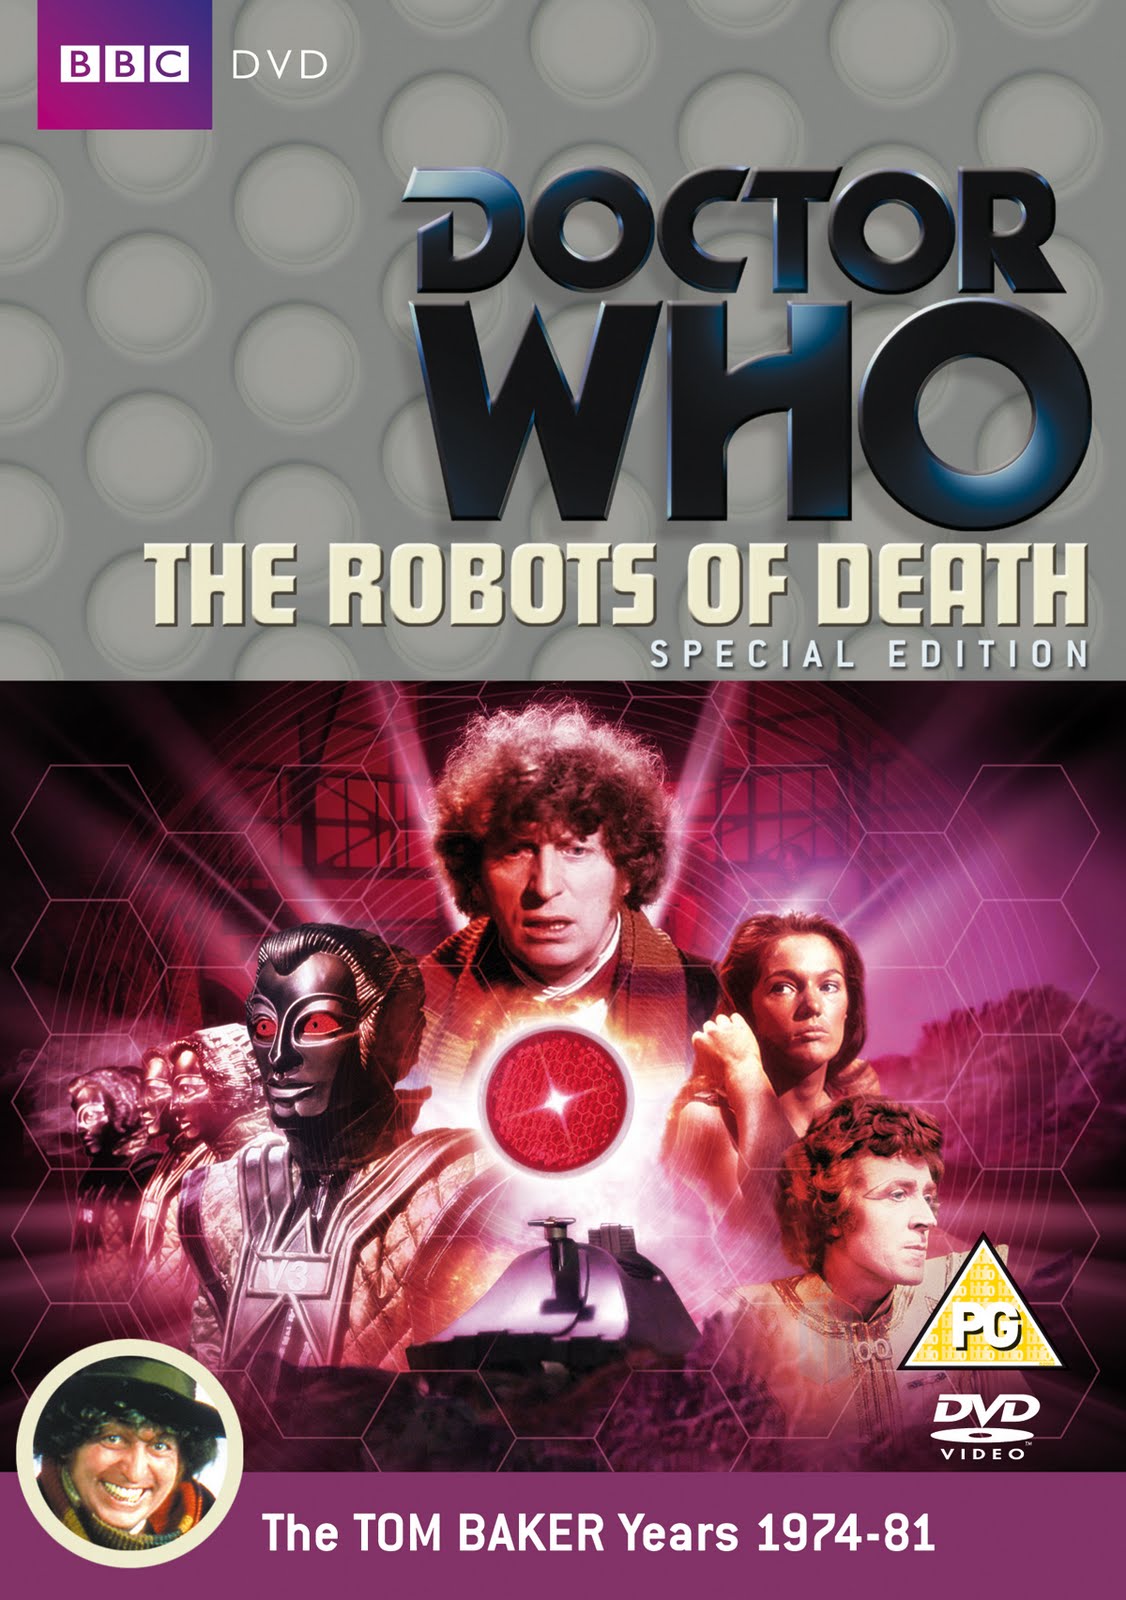 UK Special Edition cover